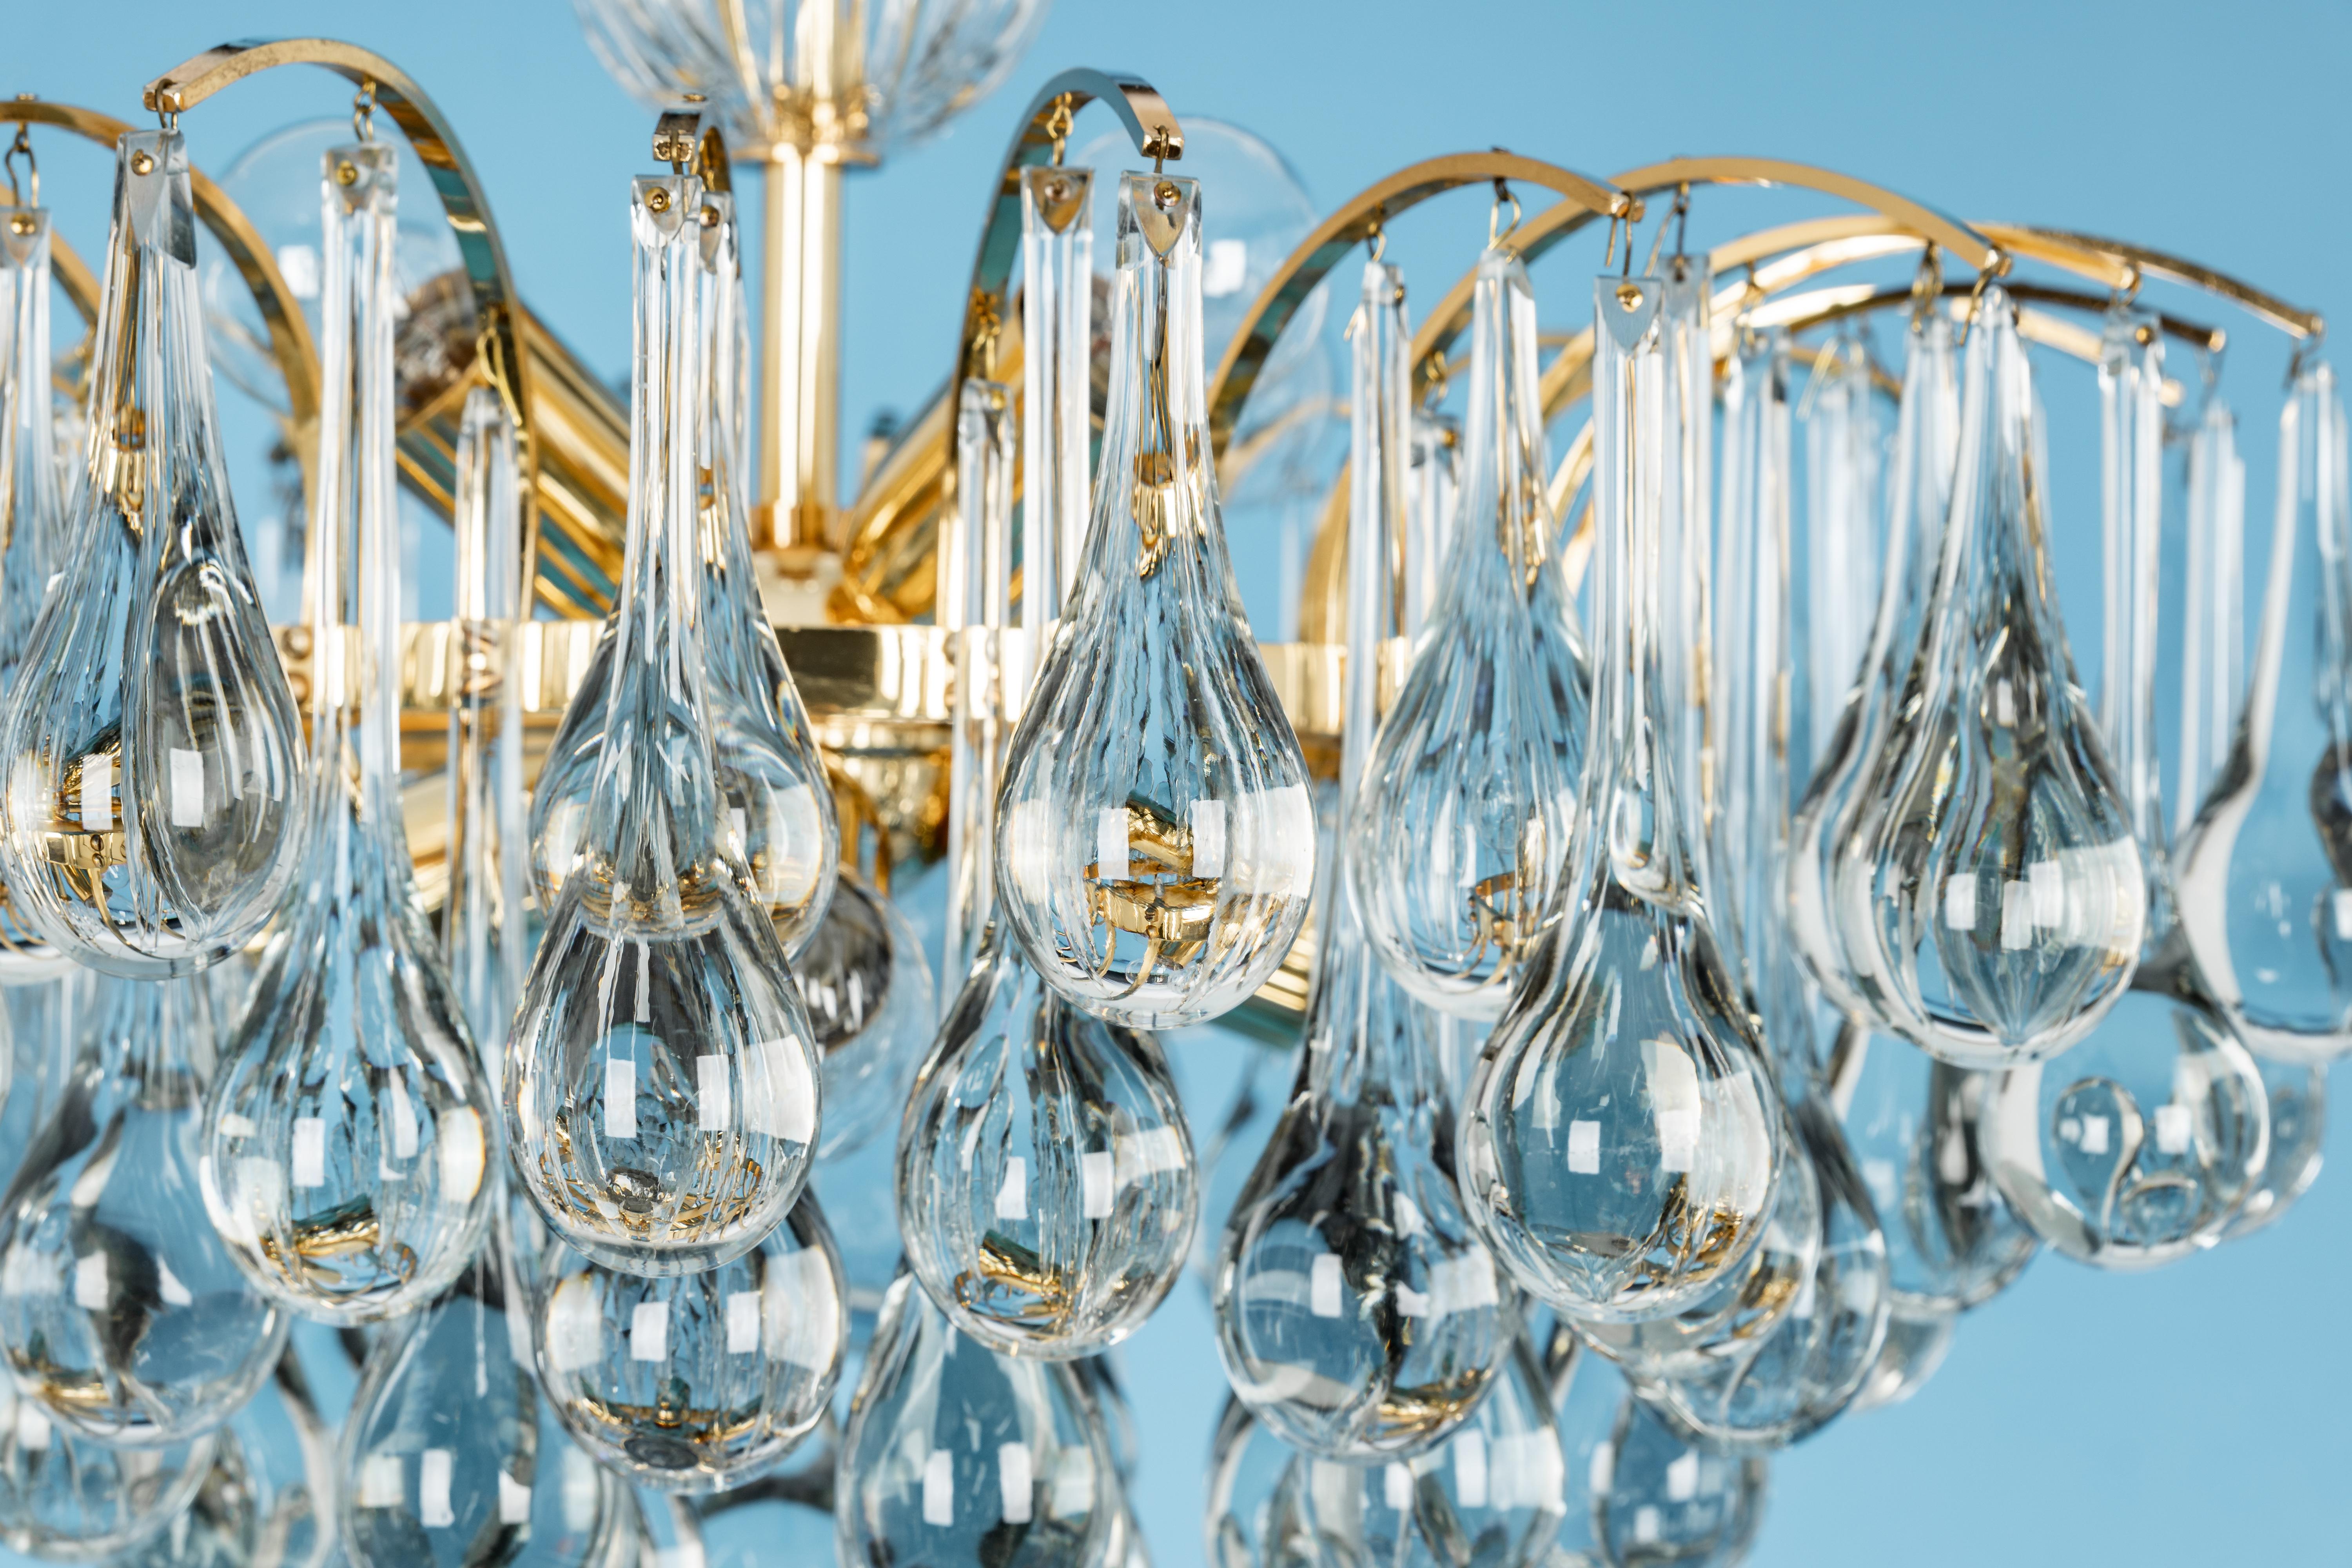 1 of 2 Large Murano Glass Tear Drop Chandelier, Christoph Palme, Germany, 1970s For Sale 13